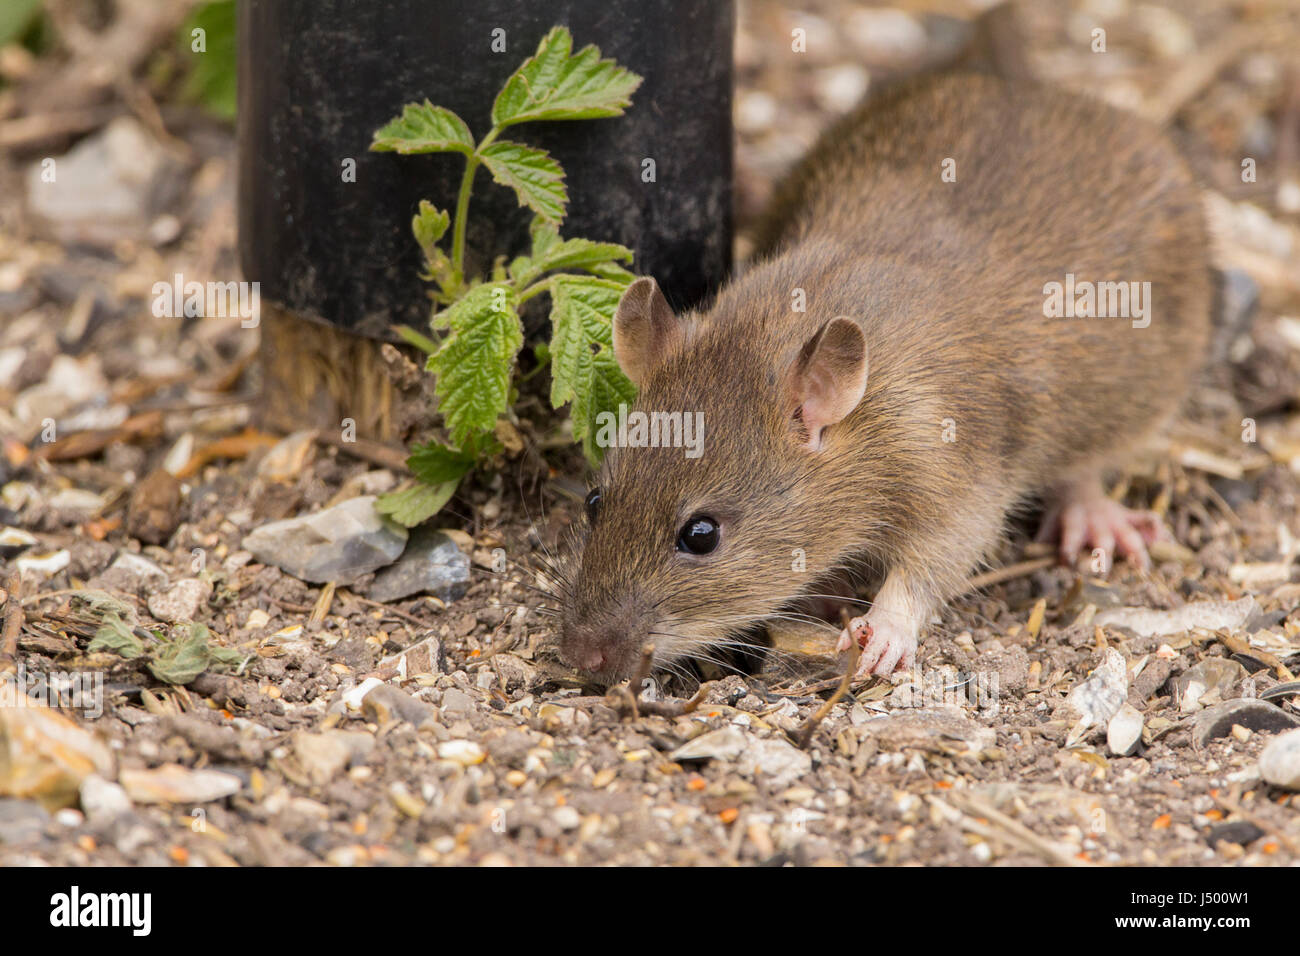 Rat brown Rattus Norvegicus feeding under bird feeder in wildlife reserve. Pointed face pink ears tail feet, black shiny beady eyes a cautious rodent. Stock Photo